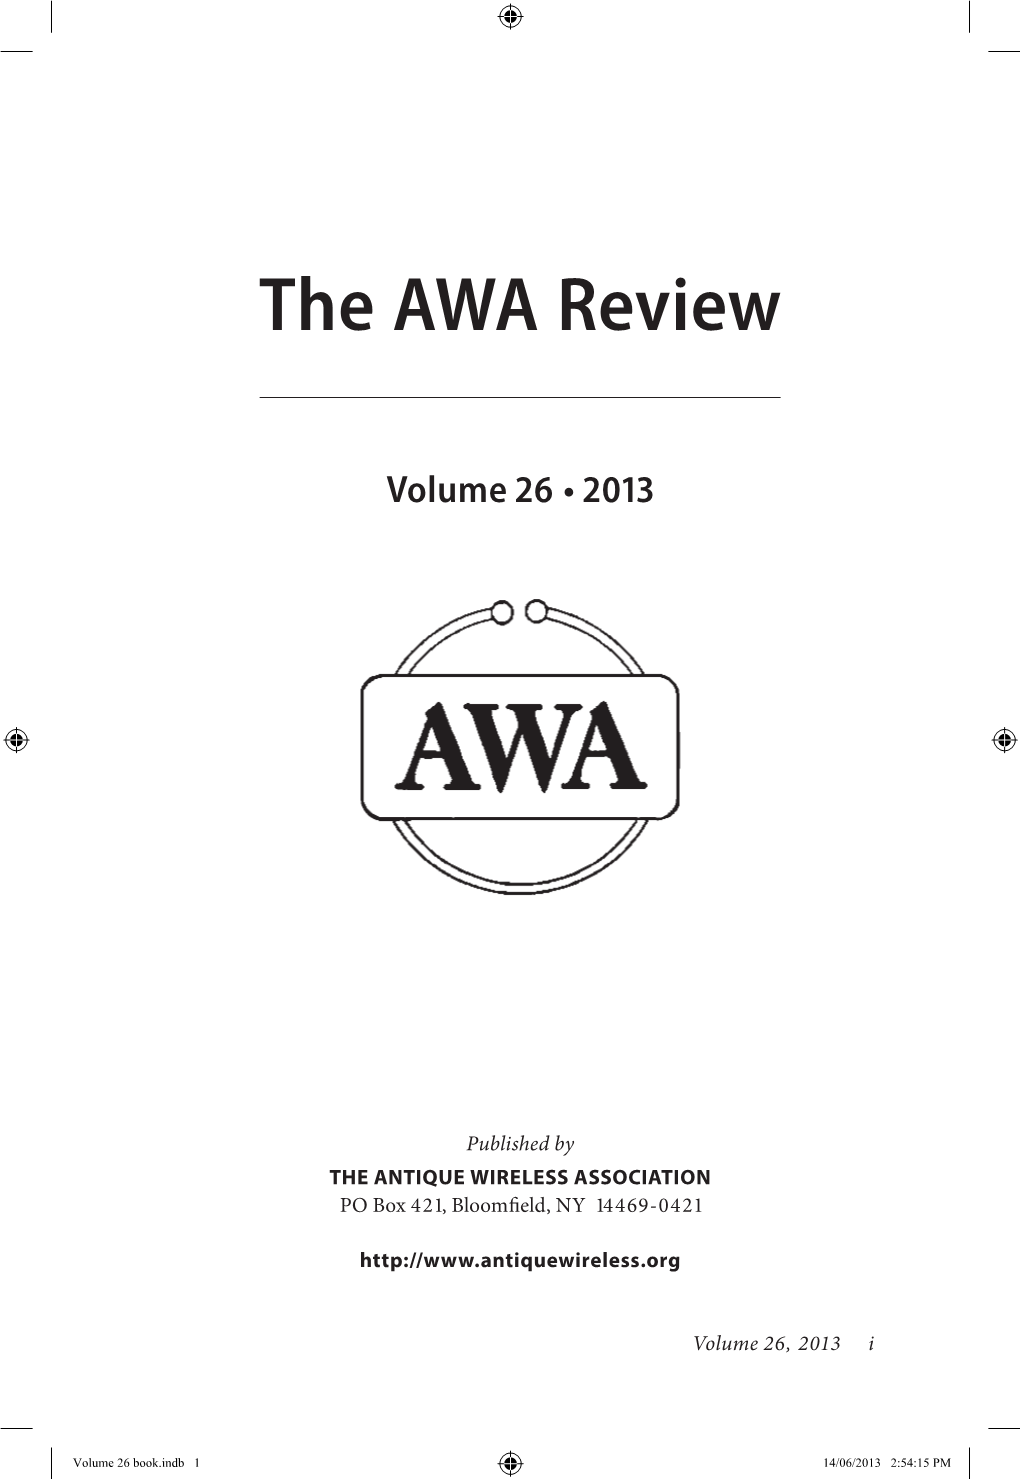 The AWA Review